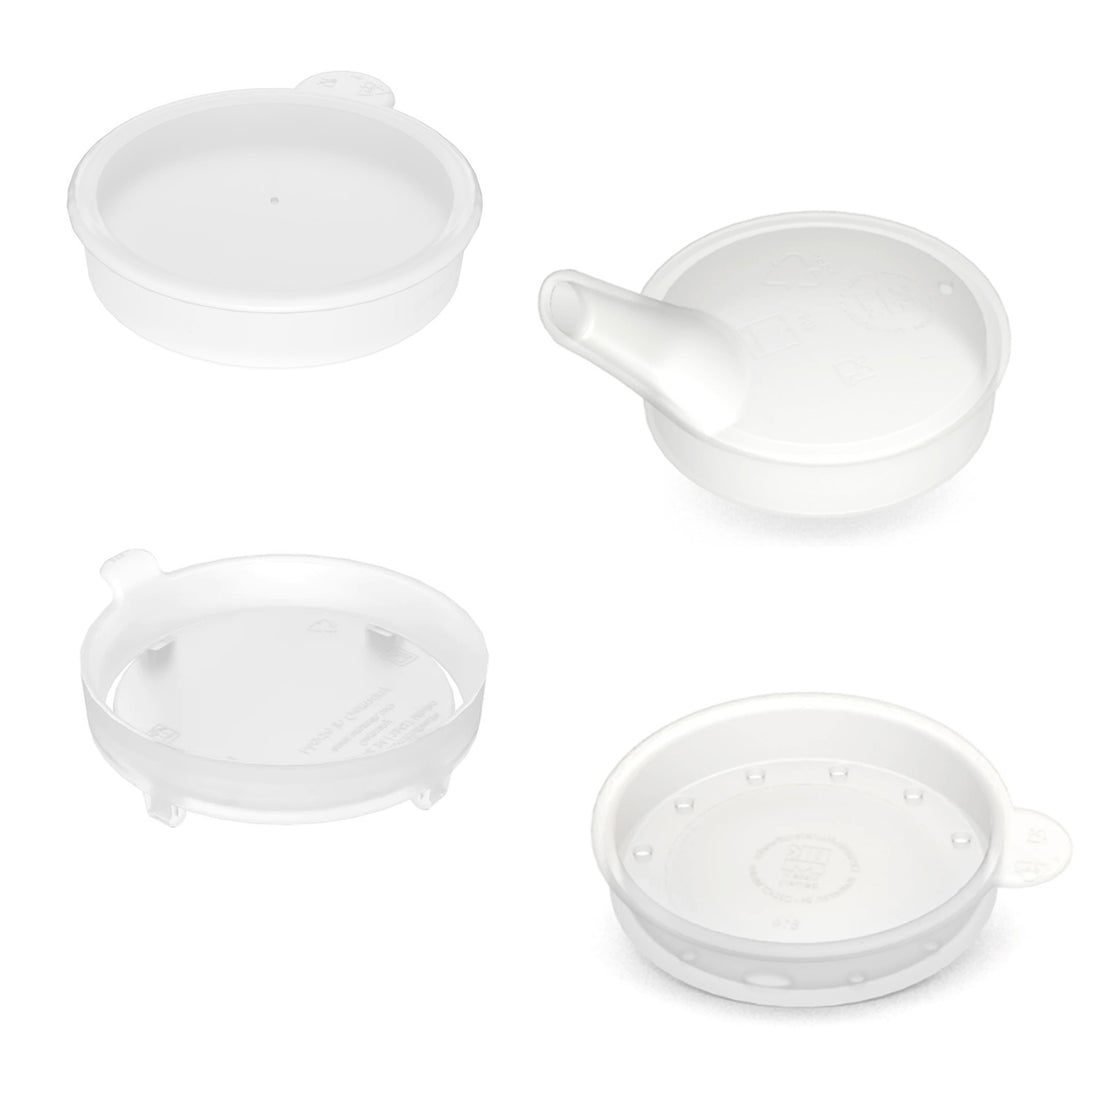 four different types of drinking lids for Ornamin mugs and cups